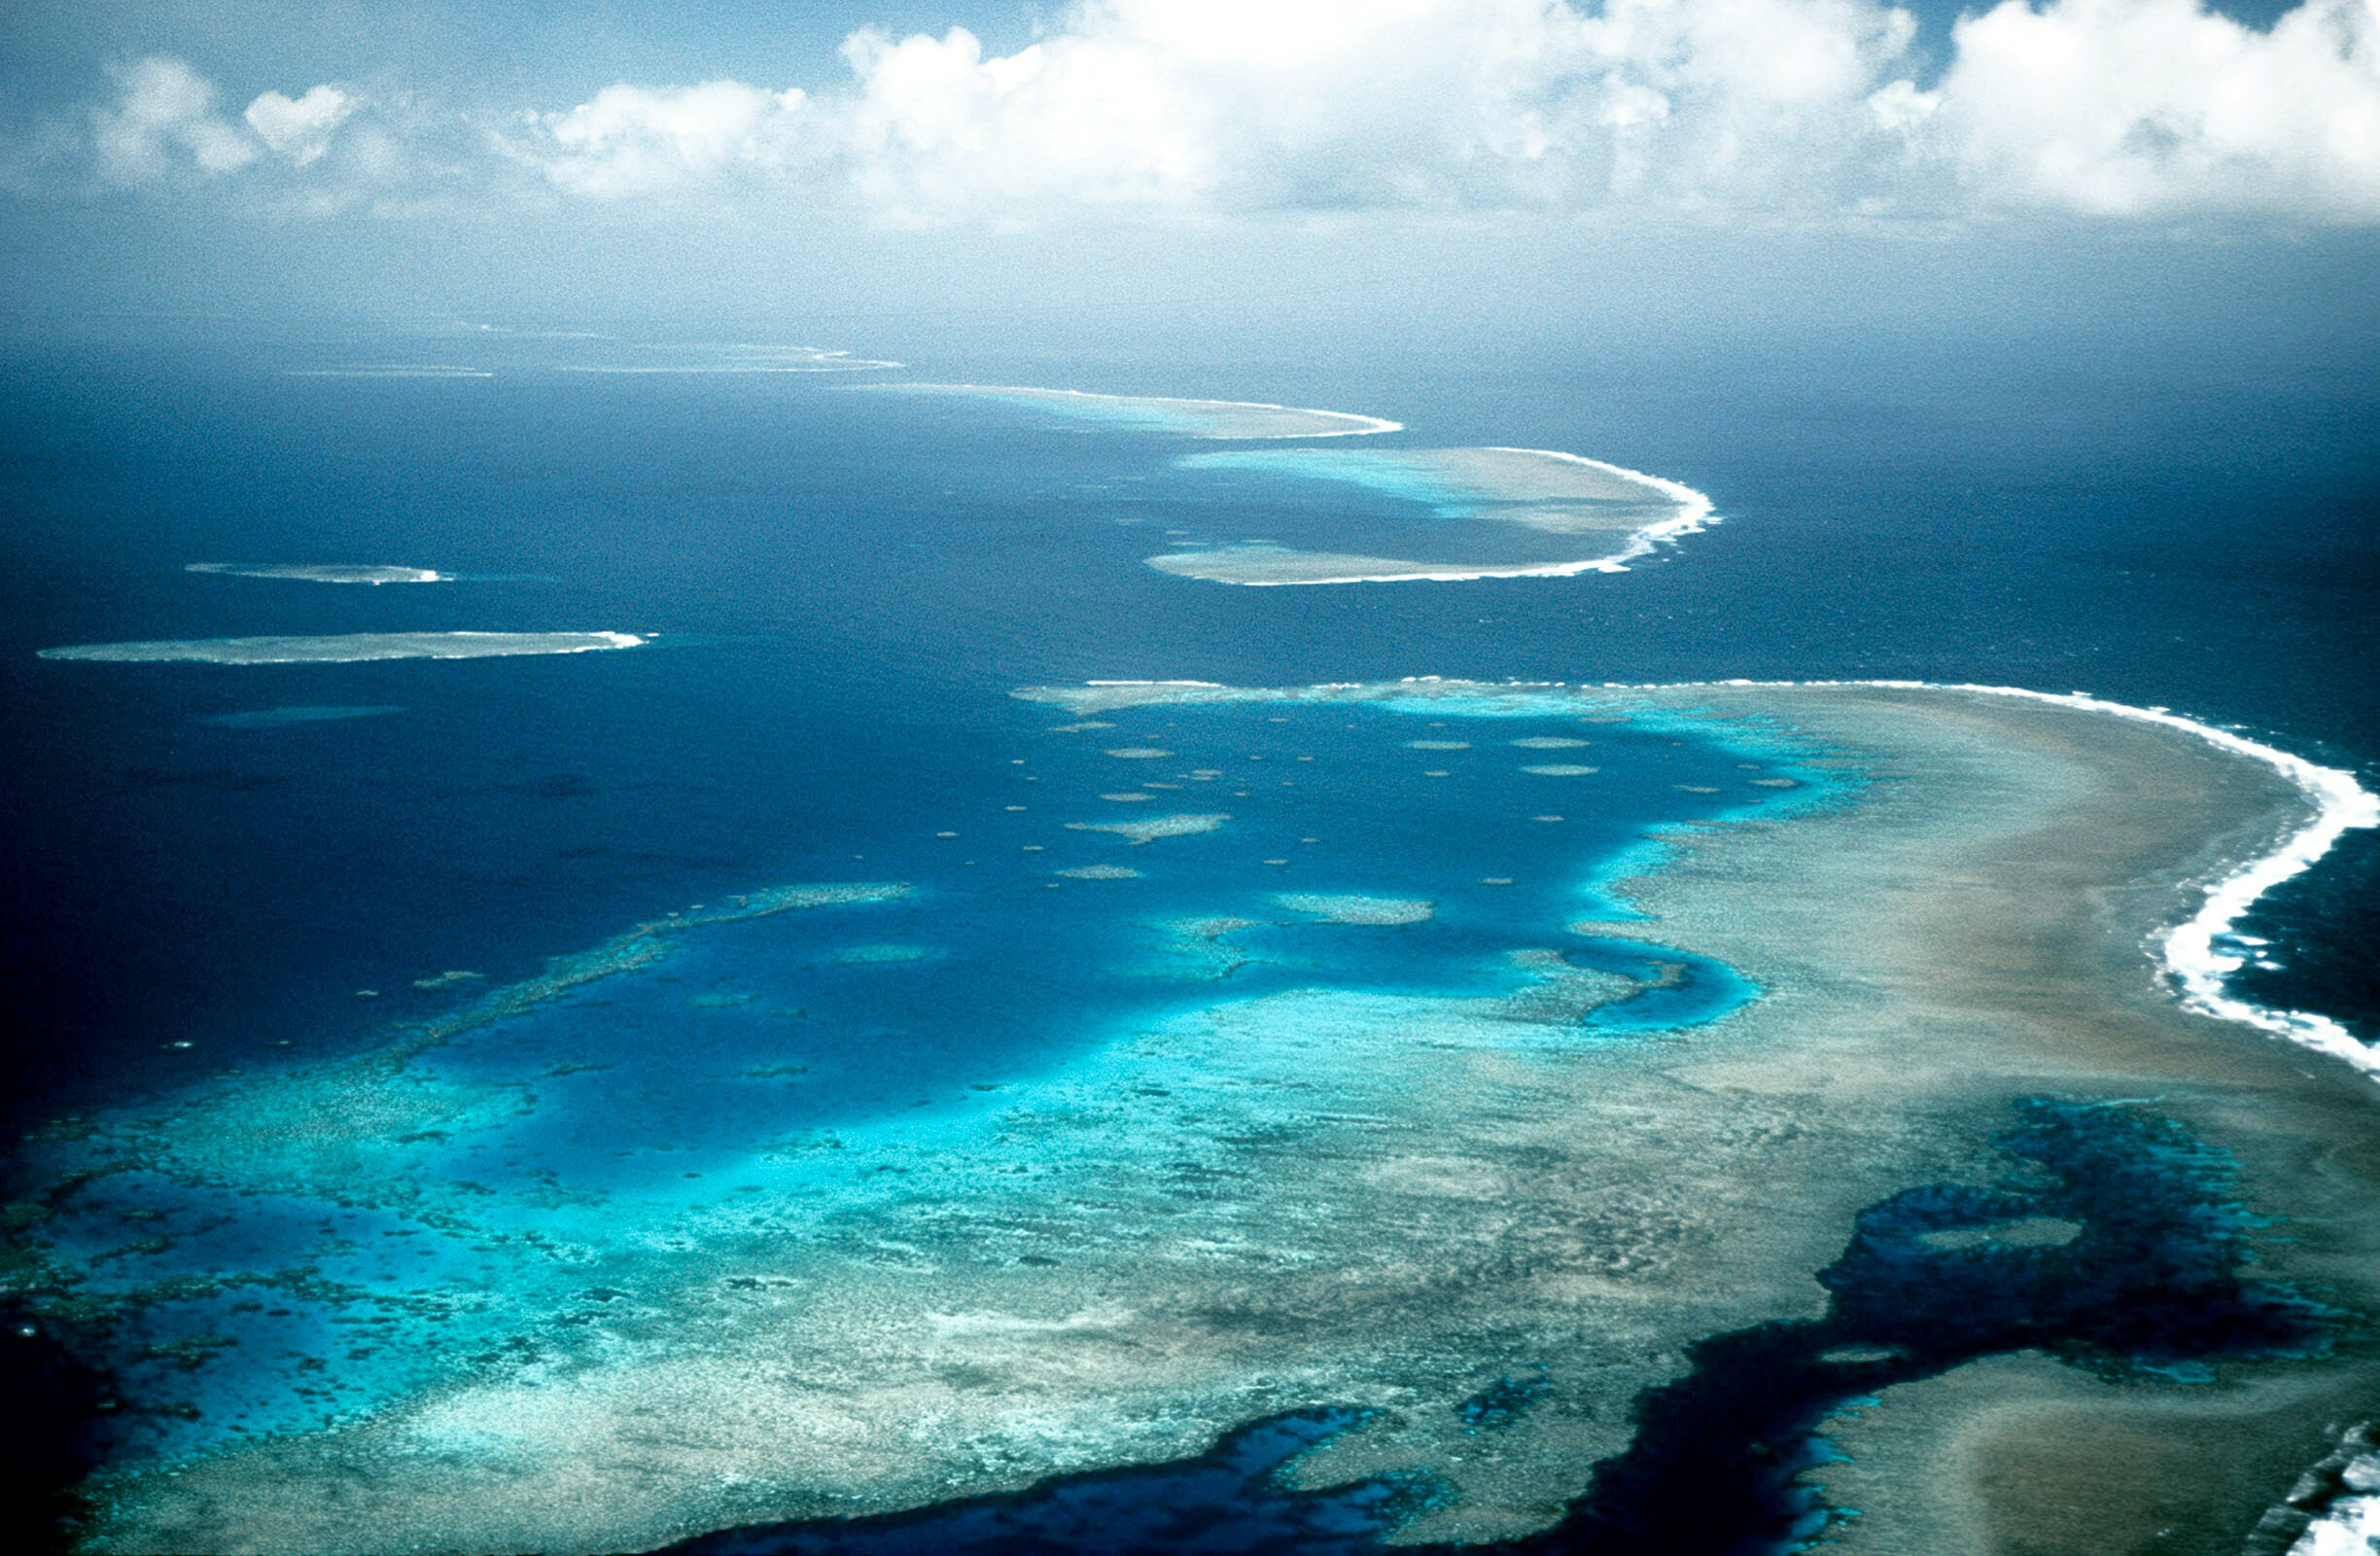 Great Barrier Reef: Seascape, One of the most spectacular maritime scenery in the world. 2450x1600 HD Wallpaper.